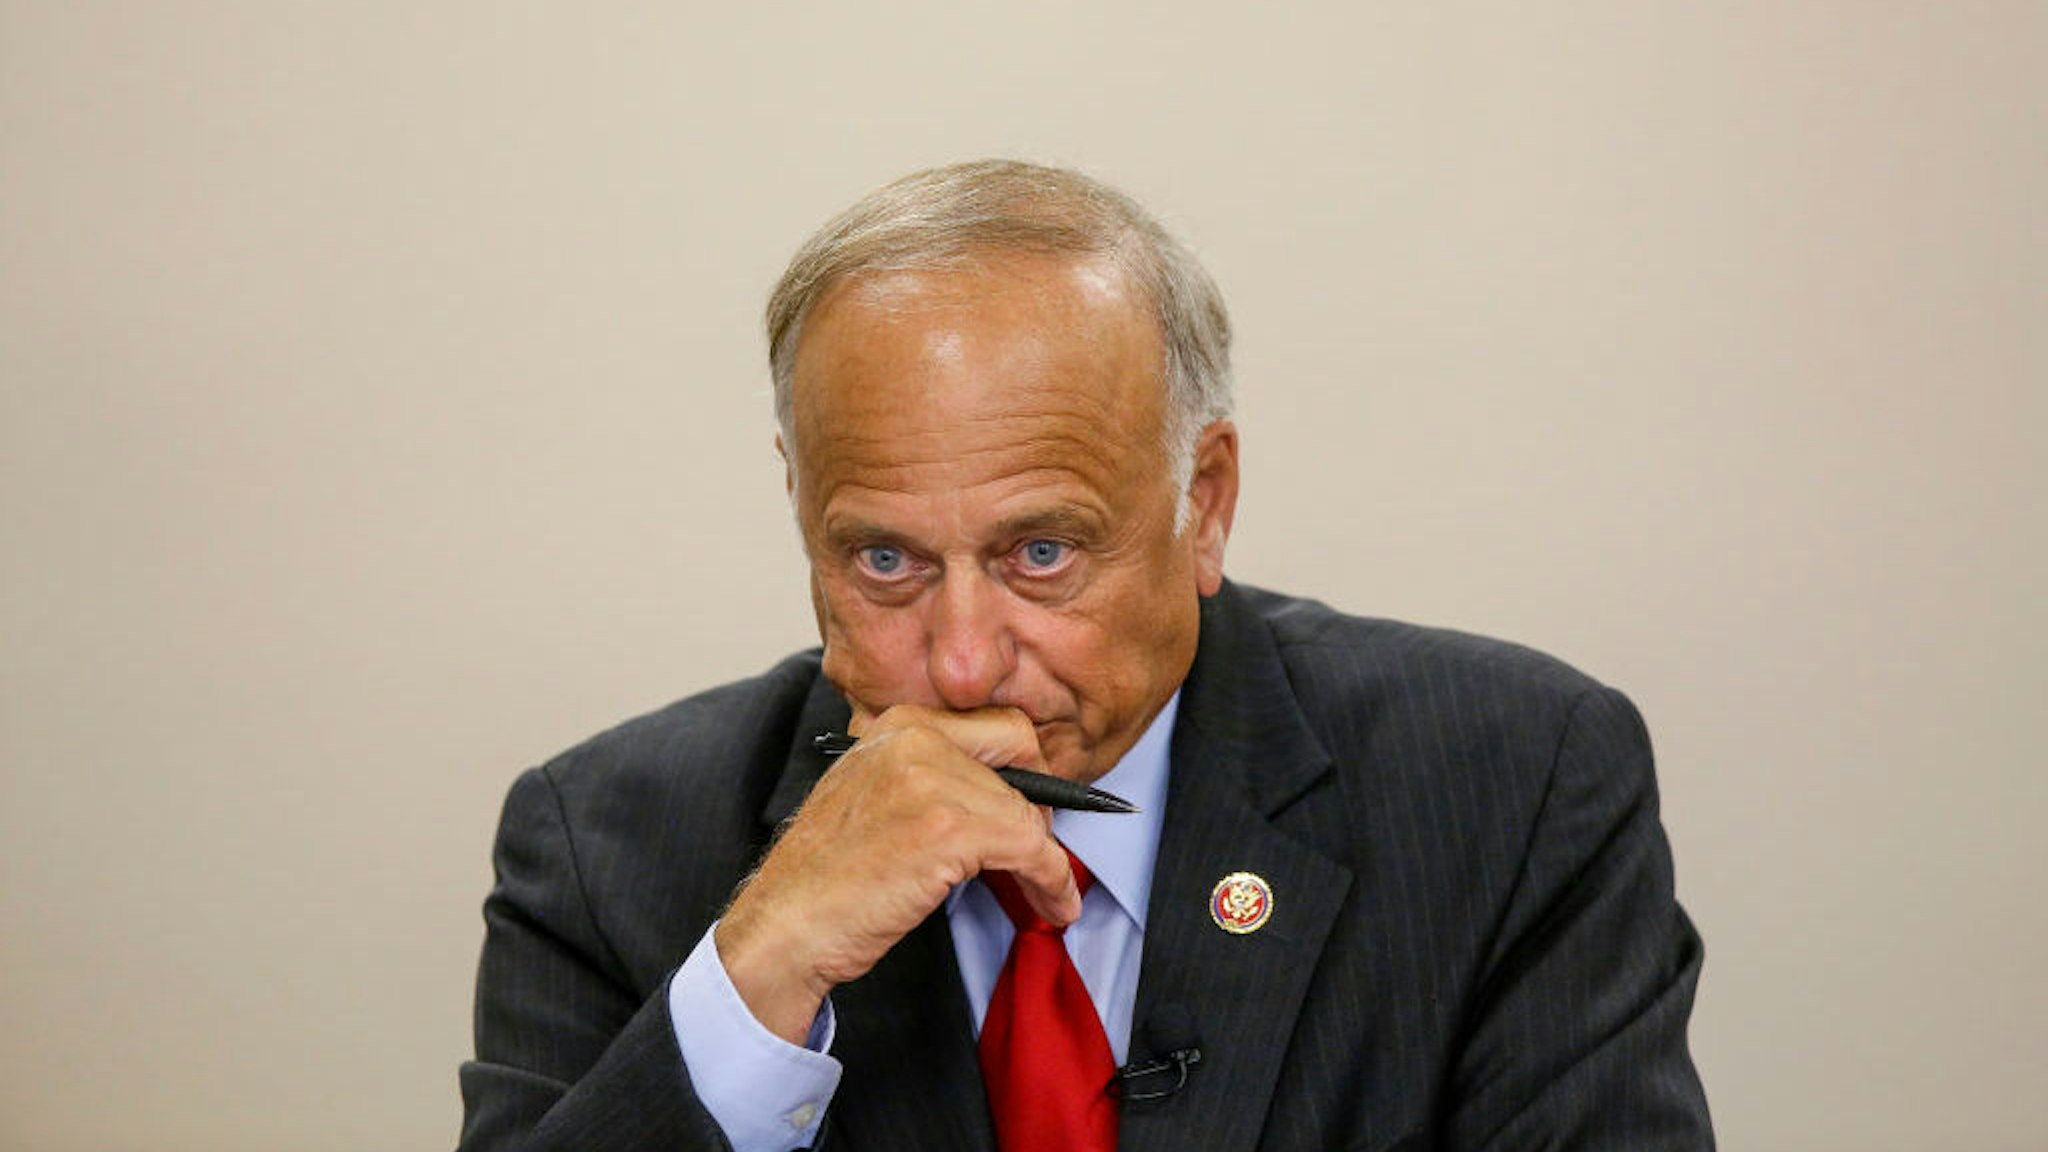 BOONE, IA - AUGUST 13: U.S. Rep. Steve King (R-IA) speaks during a town hall meeting at the Ericson Public Library on August 13, 2019 in Boone, Iowa. Steve King, who was stripped of House committee assignments earlier this year after making racist comments spoke about immigration and the U.S. and Mexico border. (Photo by Joshua Lott/Getty Images)